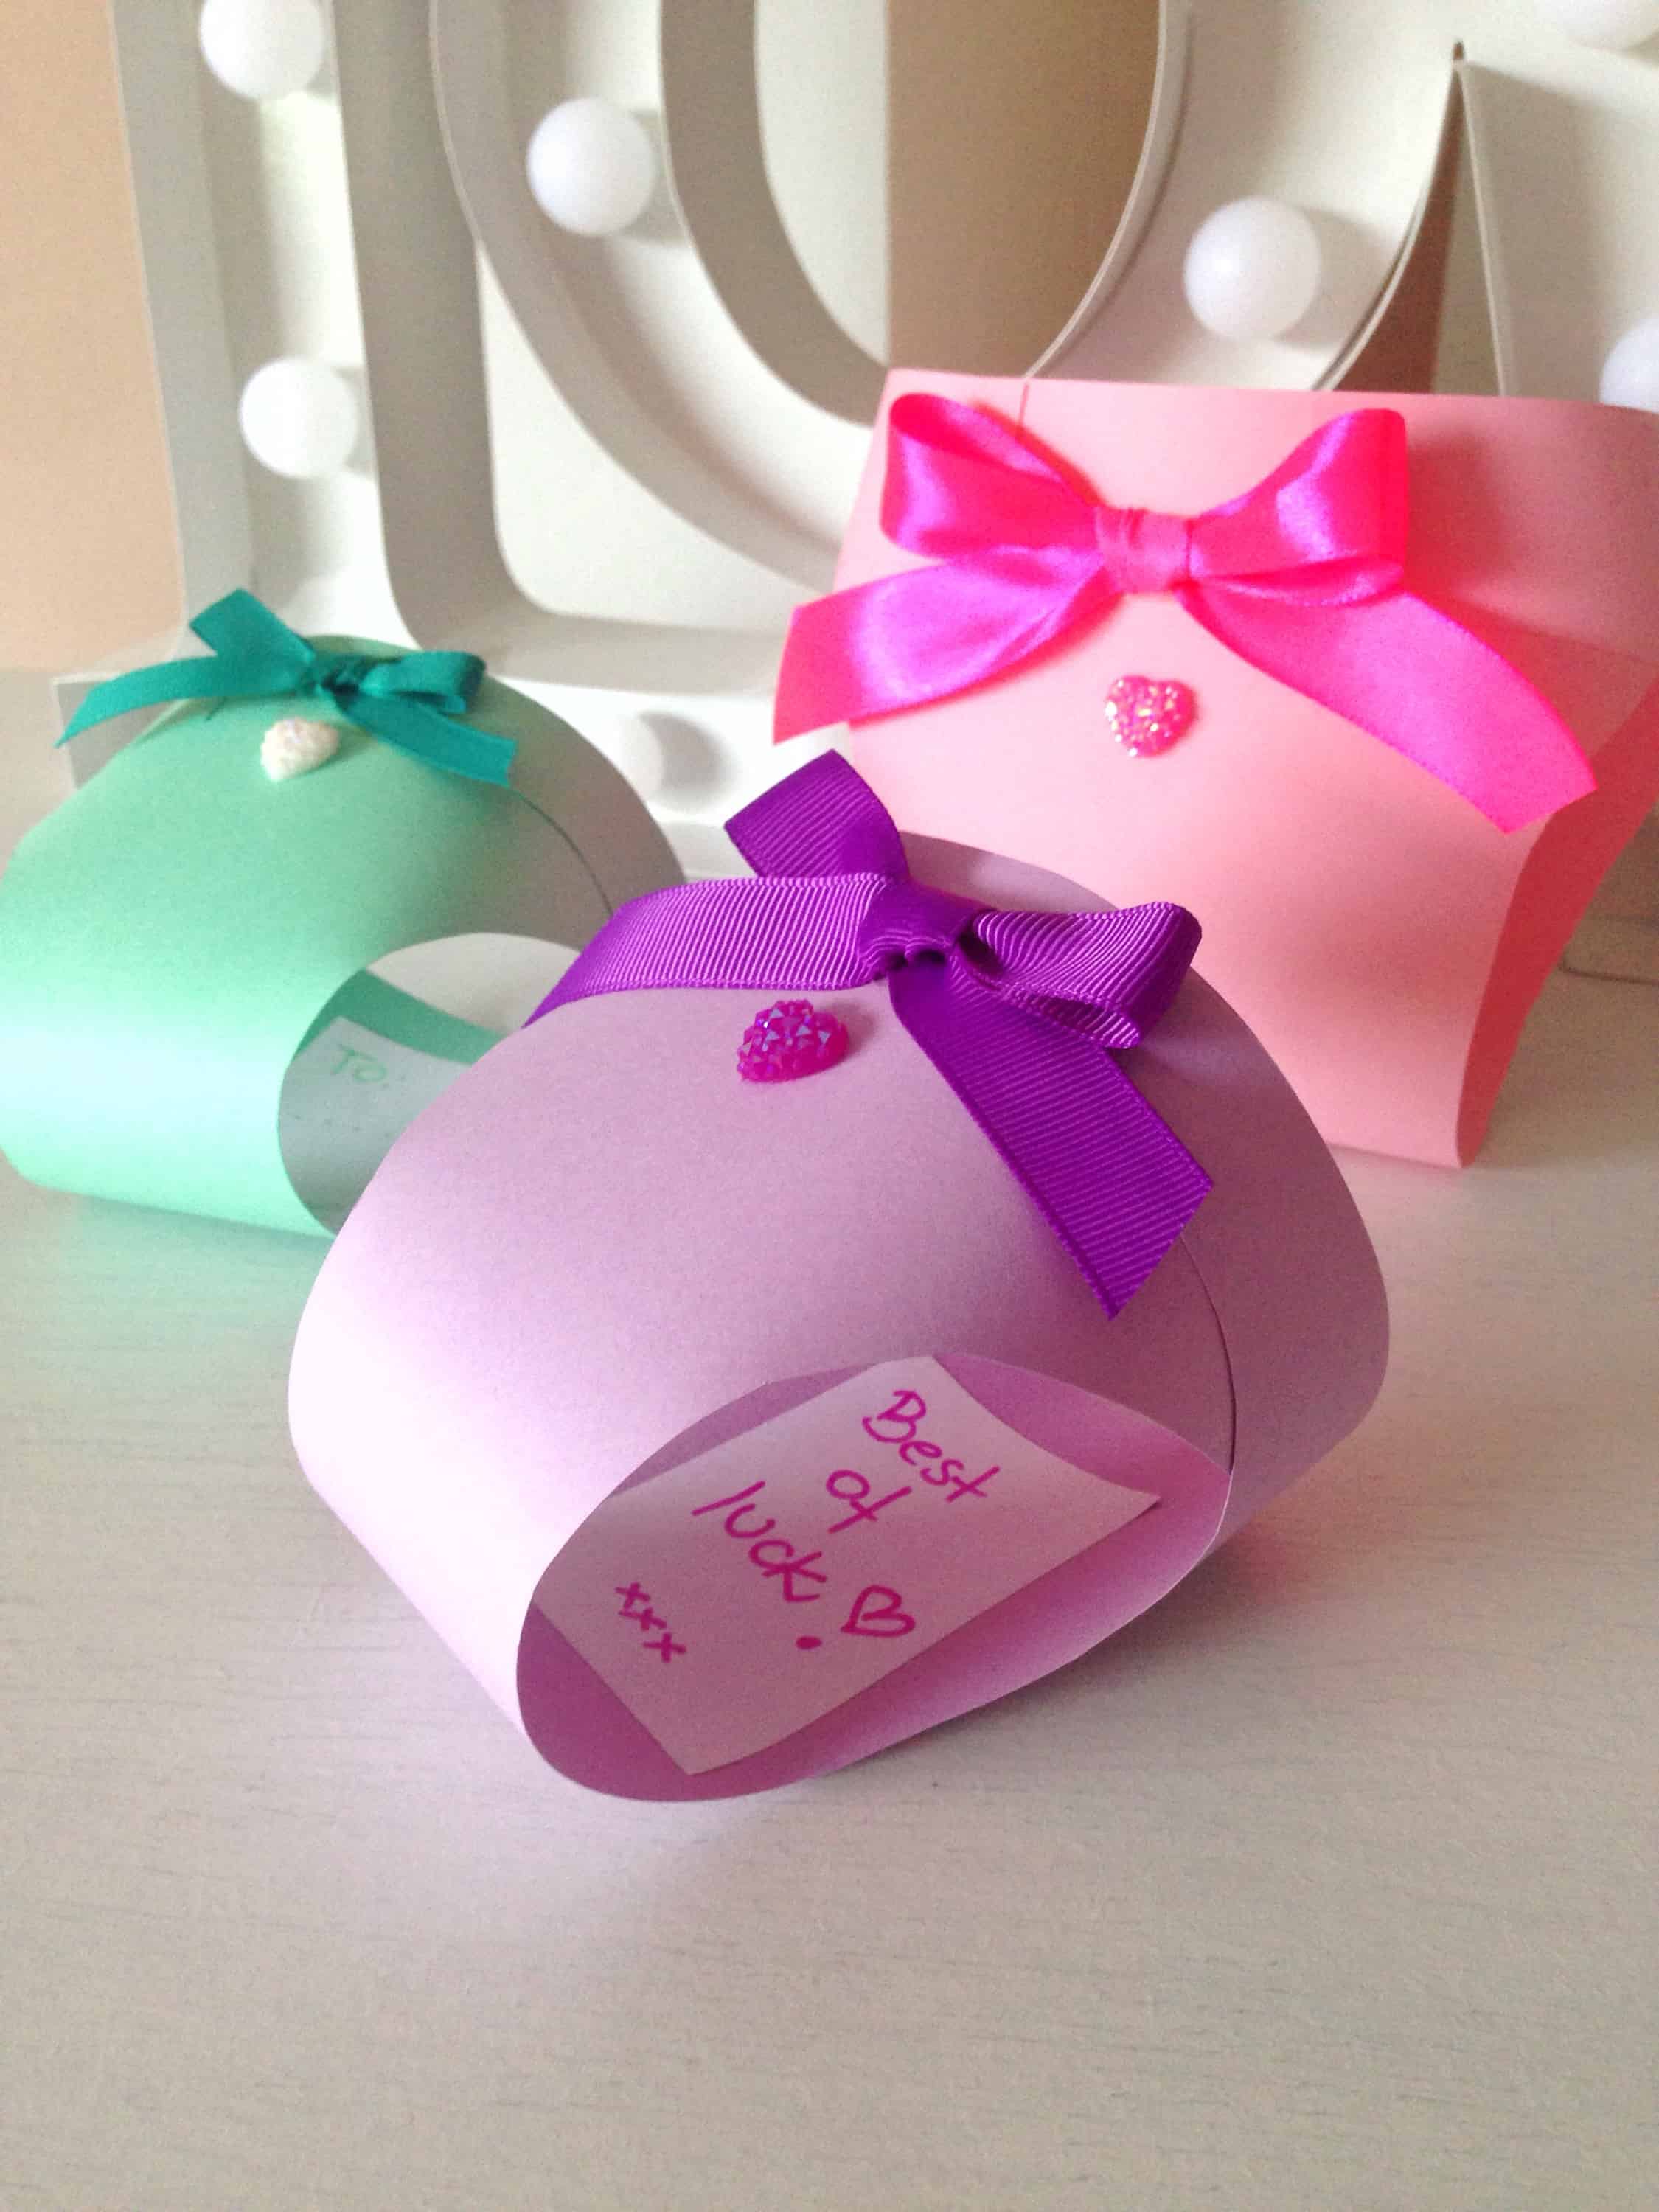 Curled paper and ribbon baby shower wishes